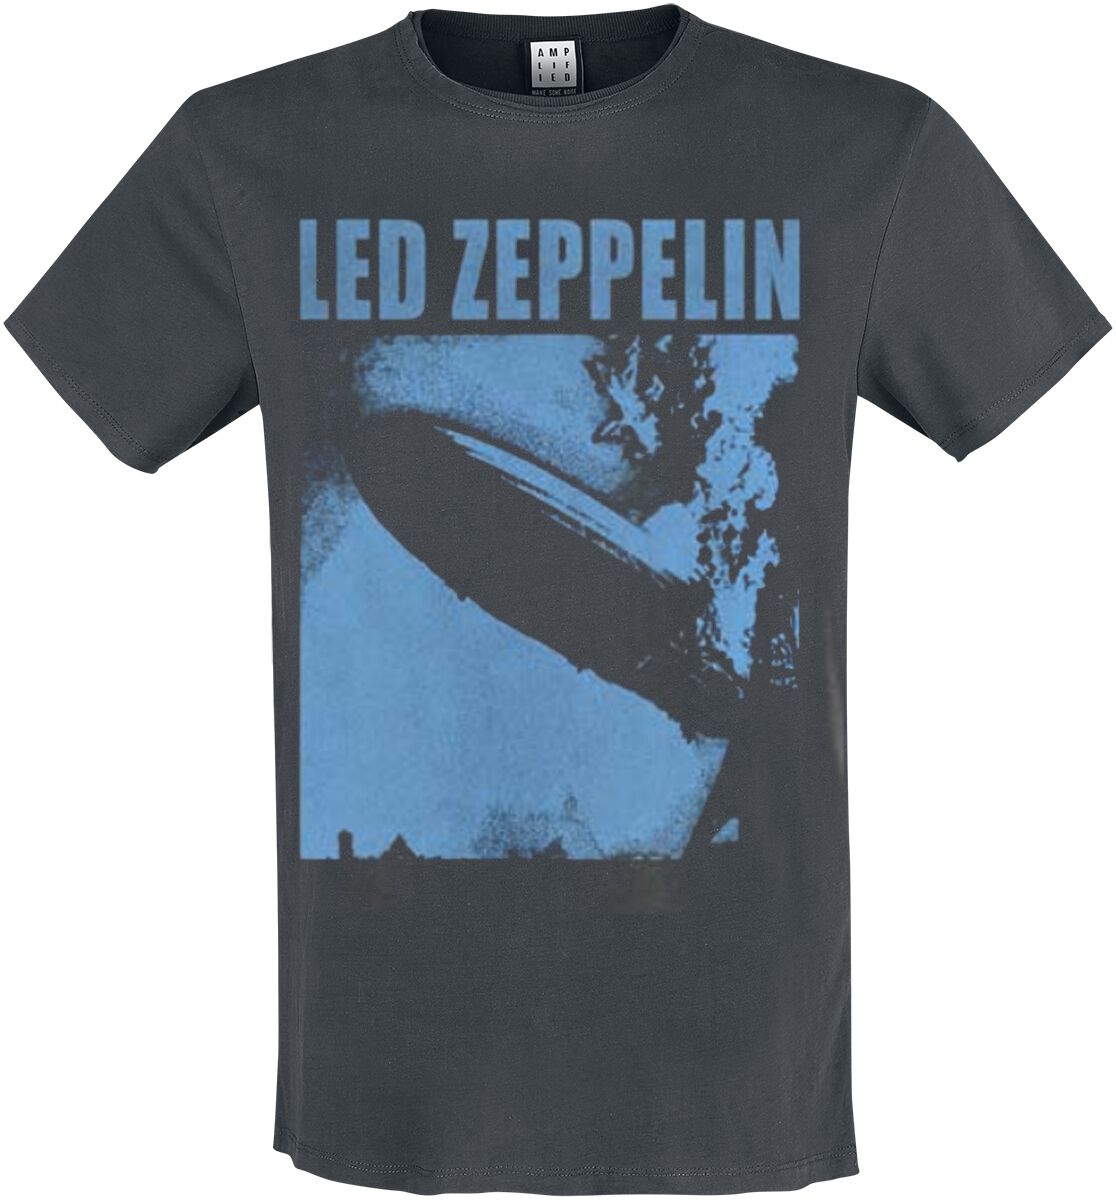 Led Zeppelin Amplified Collection - Blimp Square T-Shirt charcoal